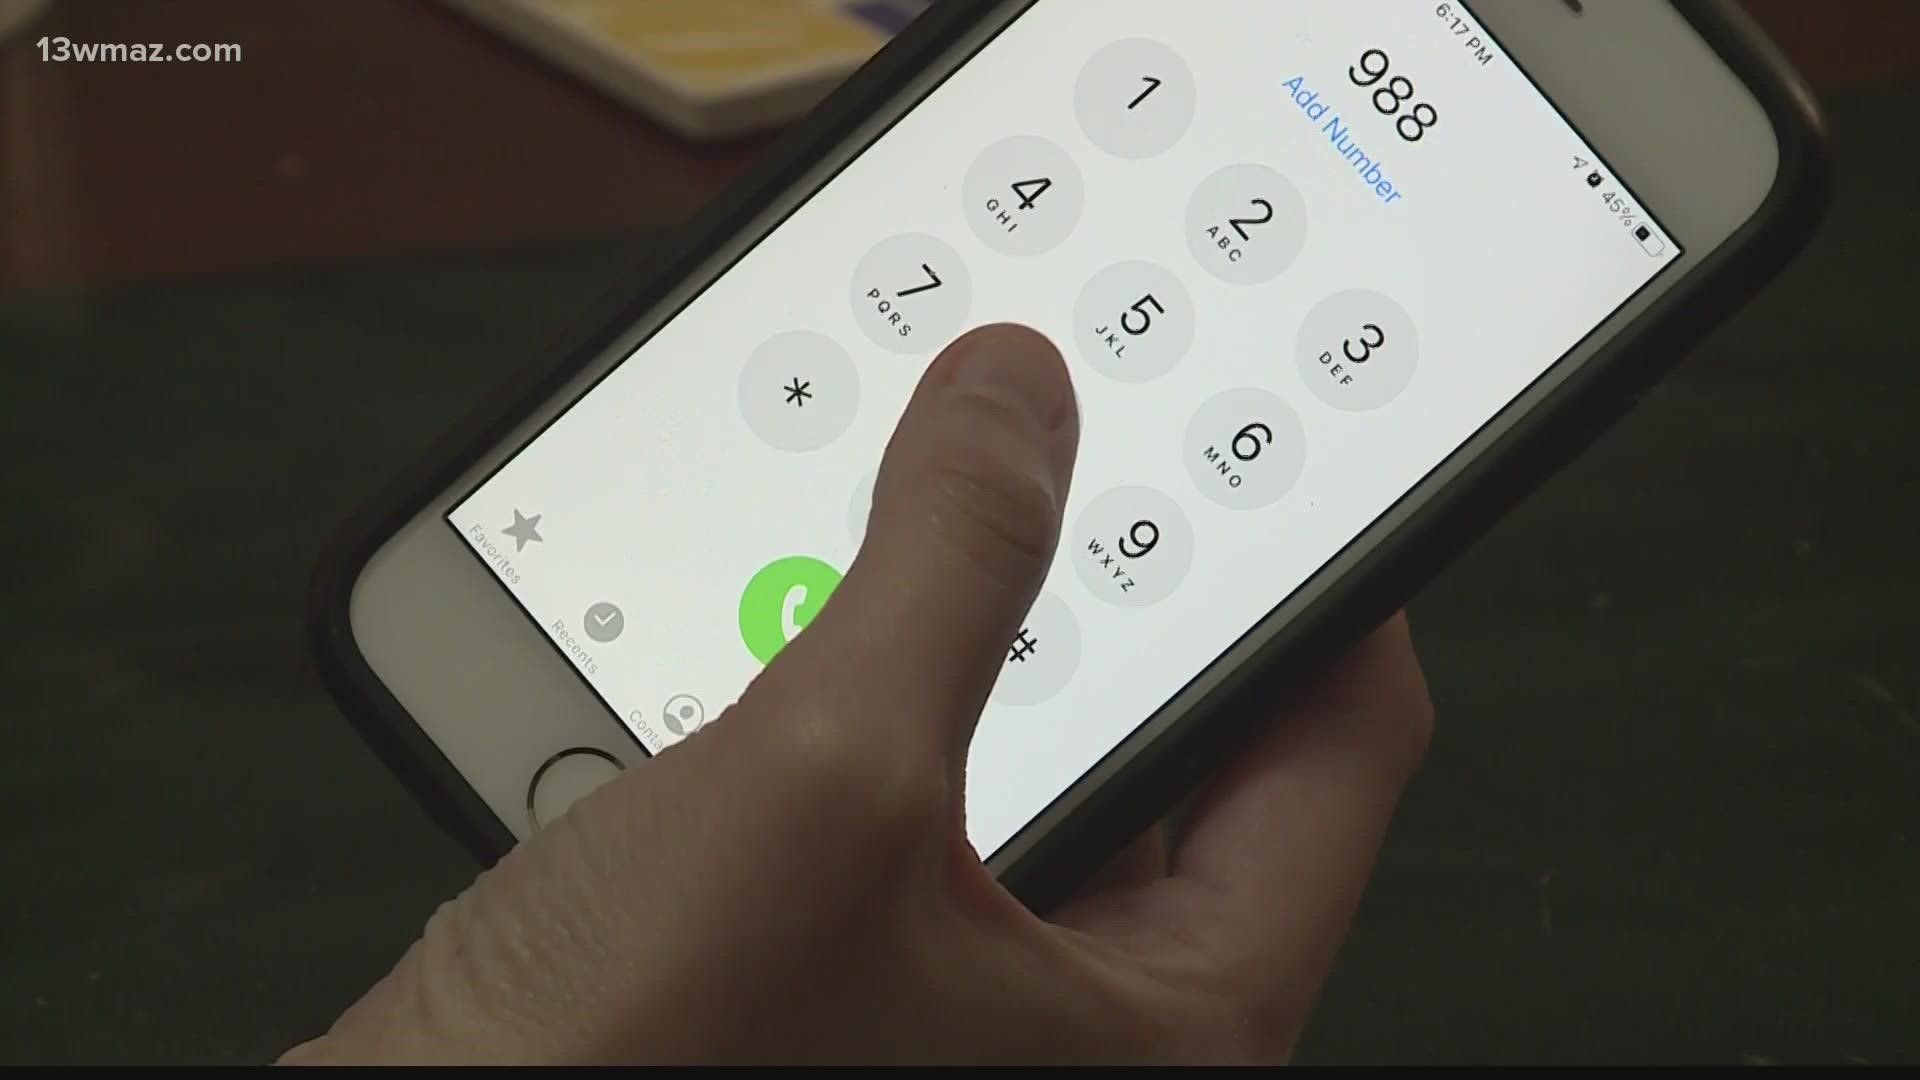 People suffering a mental health crisis will be able to simply call or text "988" to be connected with counselors.